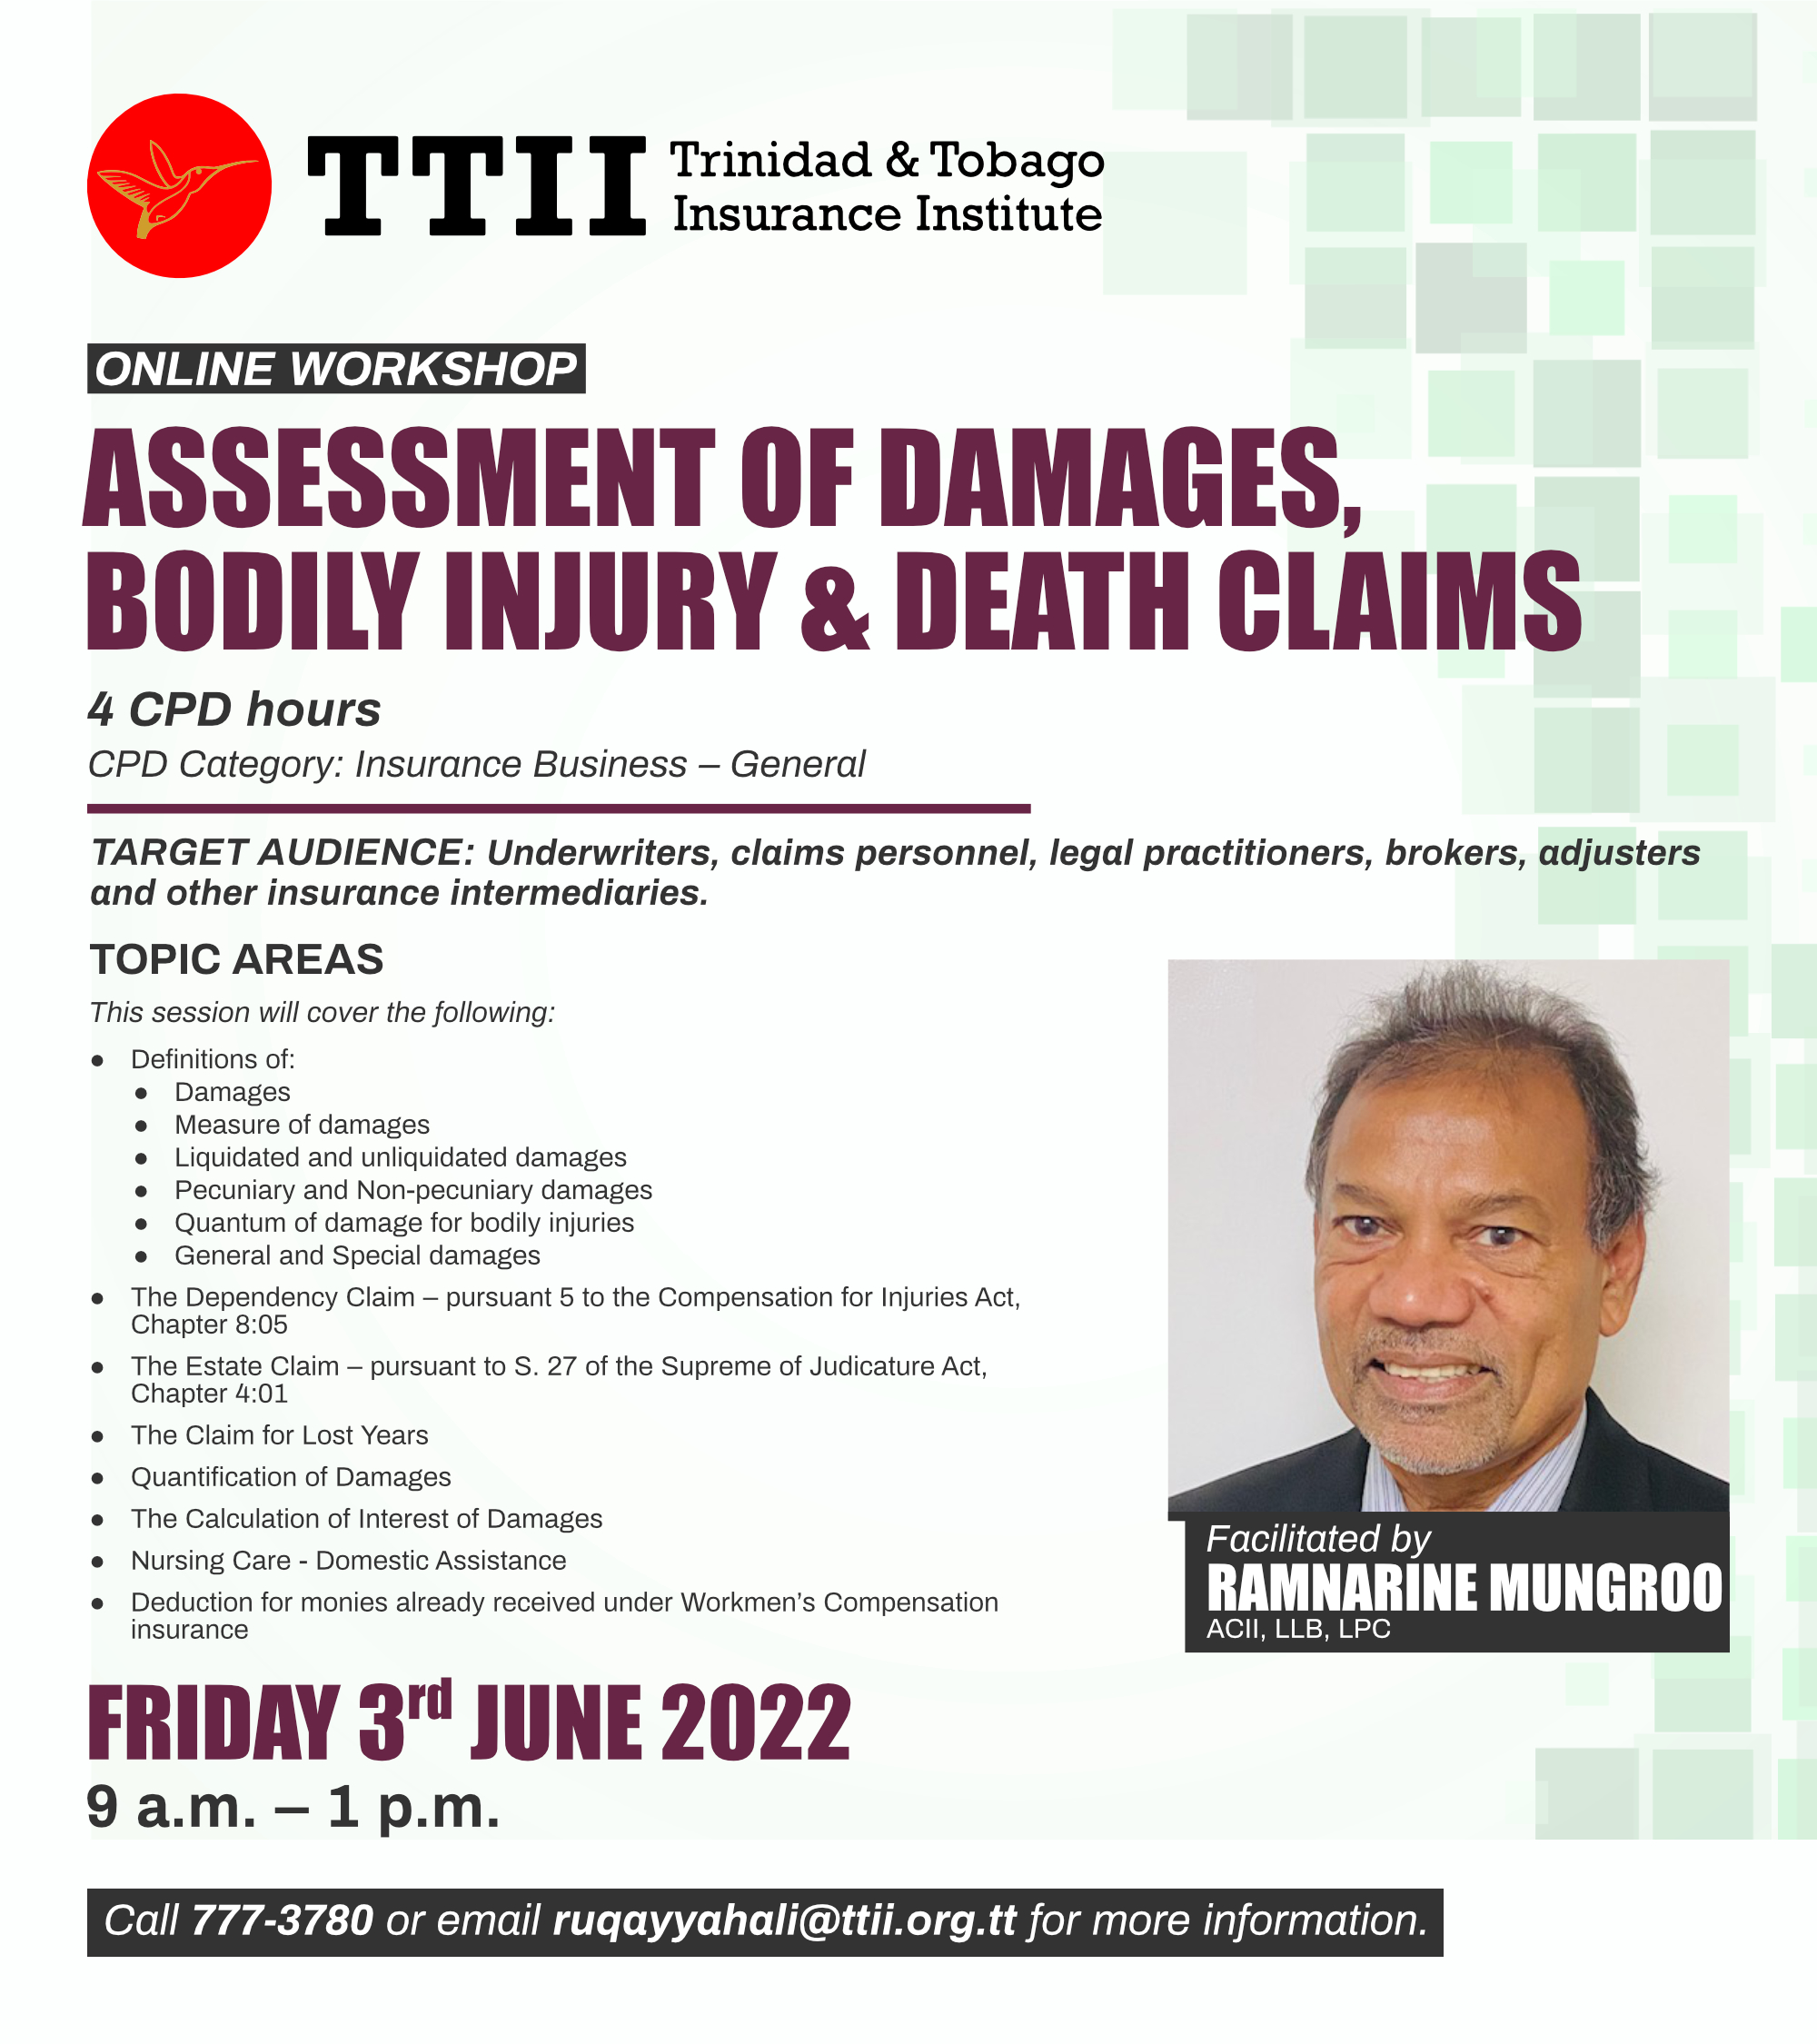 Assessment of Damages, Bodily Injury & Death Claims